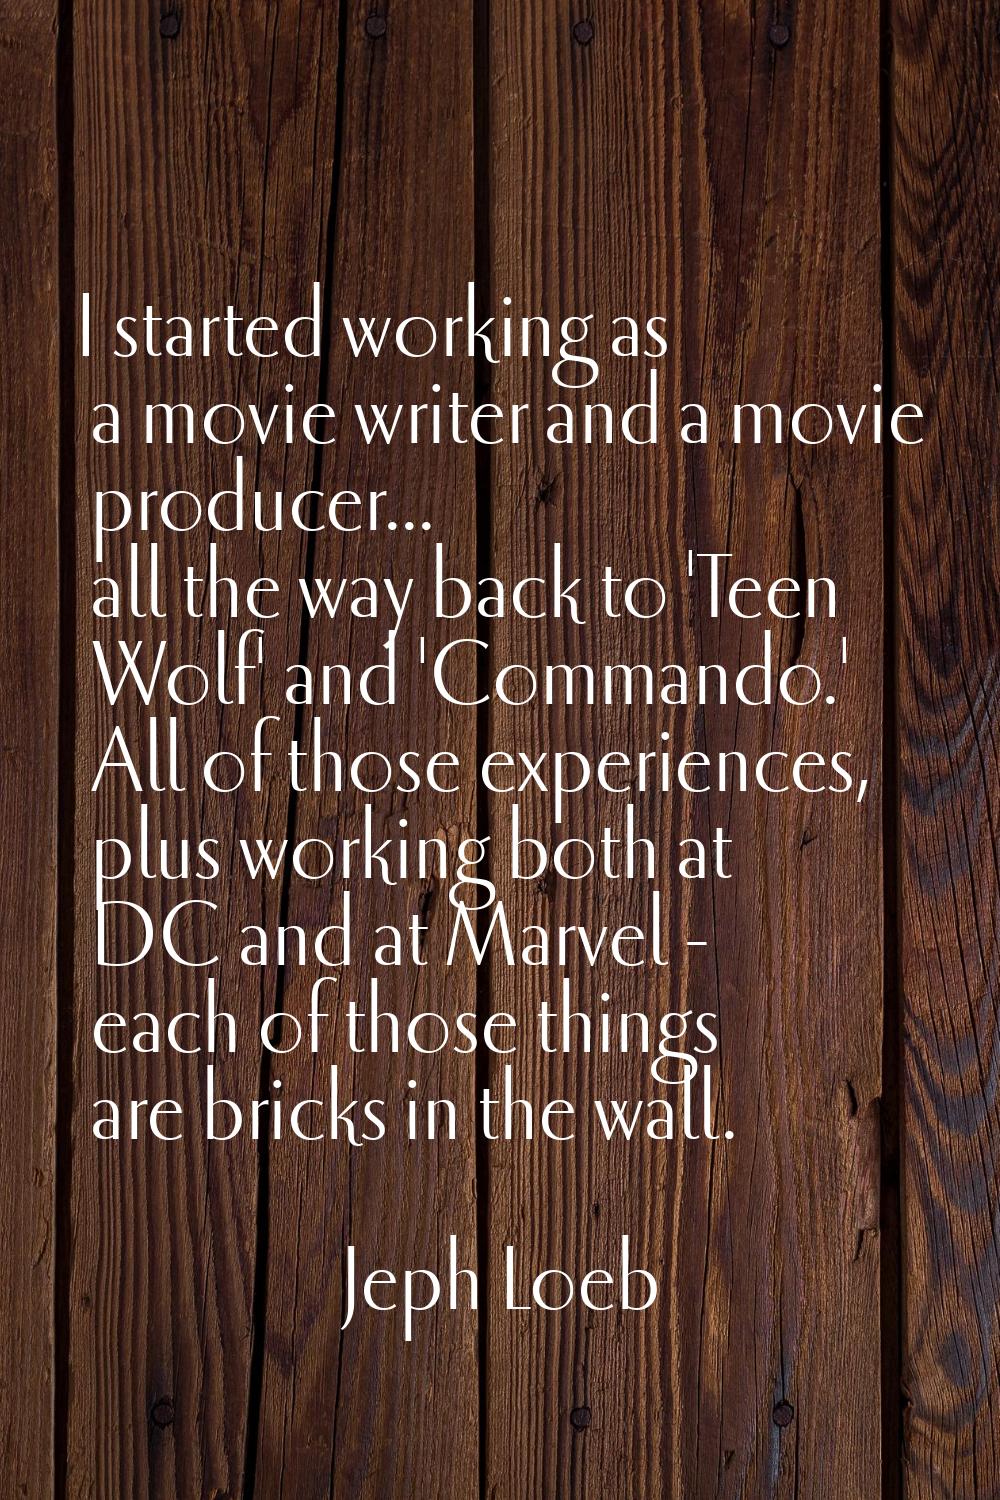 I started working as a movie writer and a movie producer... all the way back to 'Teen Wolf' and 'Co